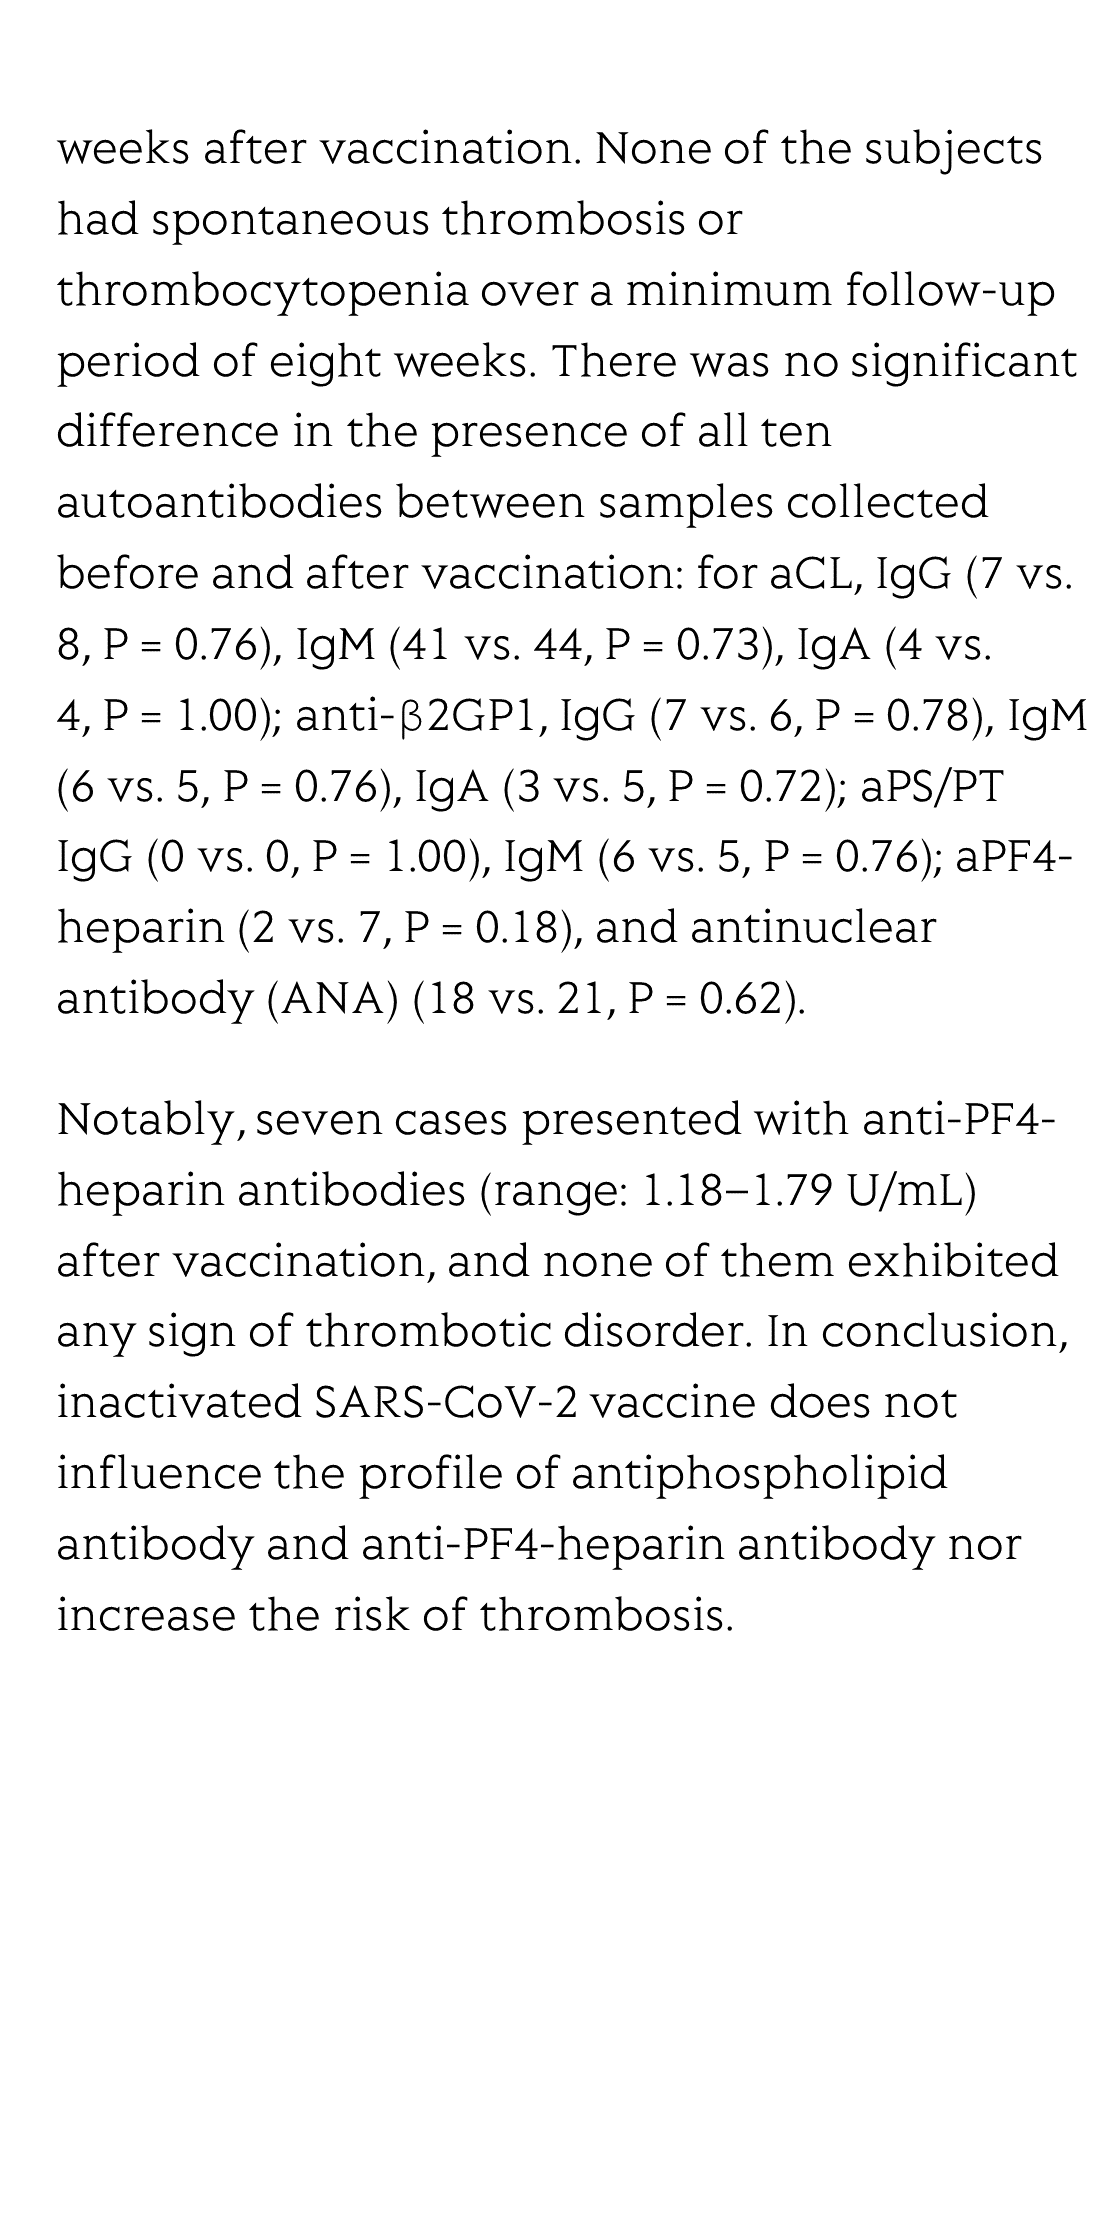 Inactivated SARS-CoV-2 vaccine does not influence the profile of prothrombotic antibody nor increase the risk of thrombosis in a prospective Chinese cohort_3